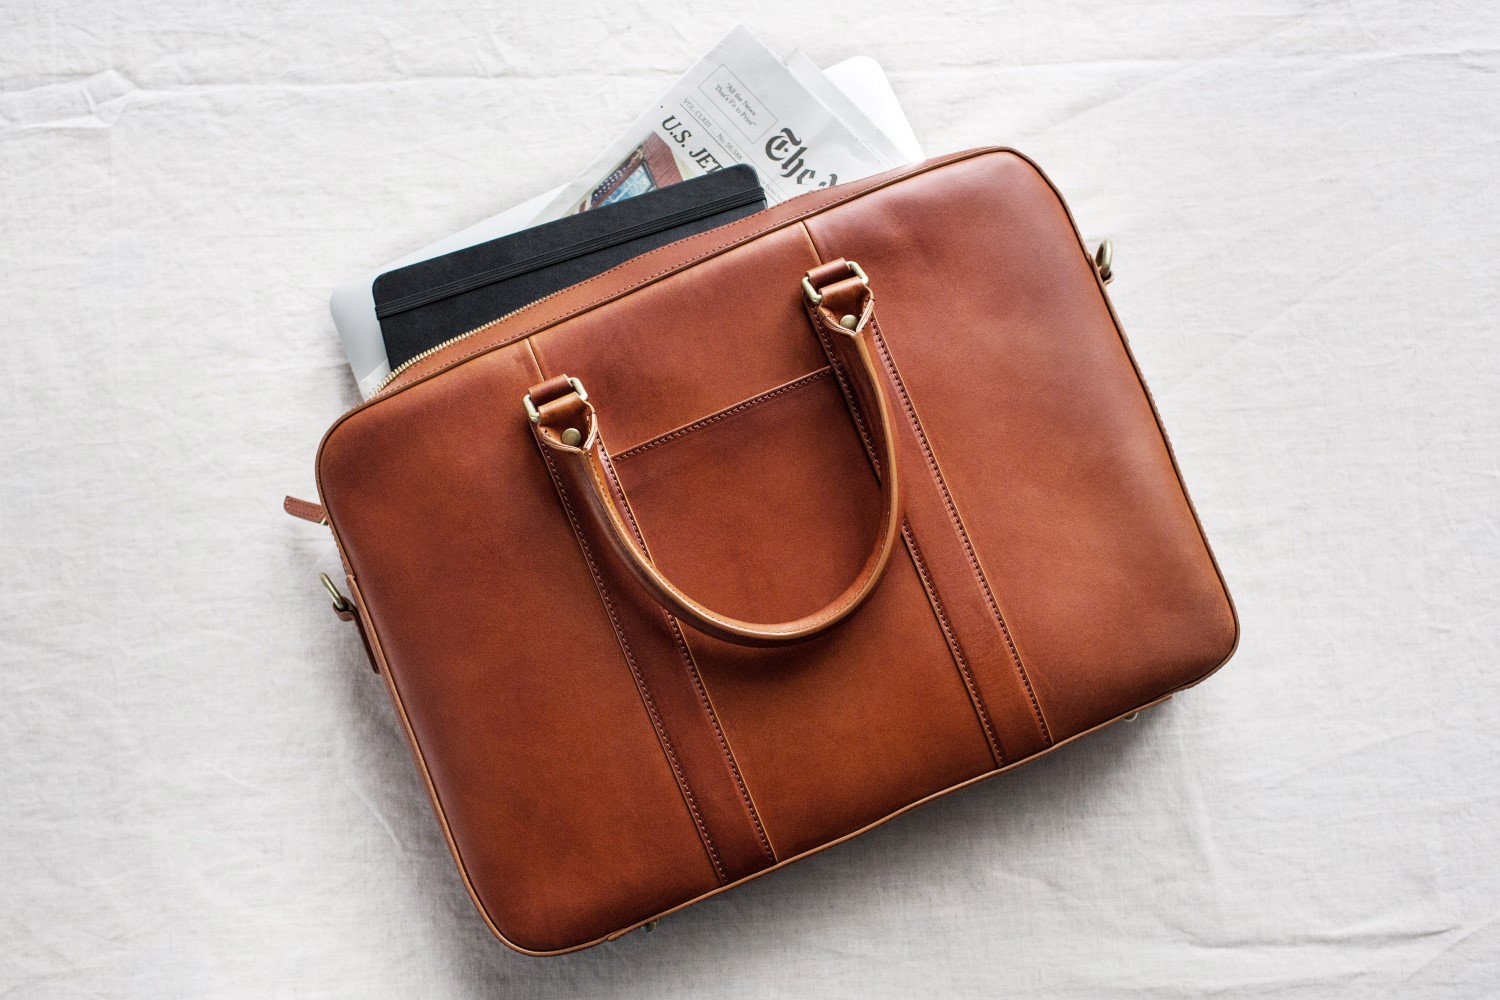 The Warby Parker for Luxury Leather Bags - Linjer founders